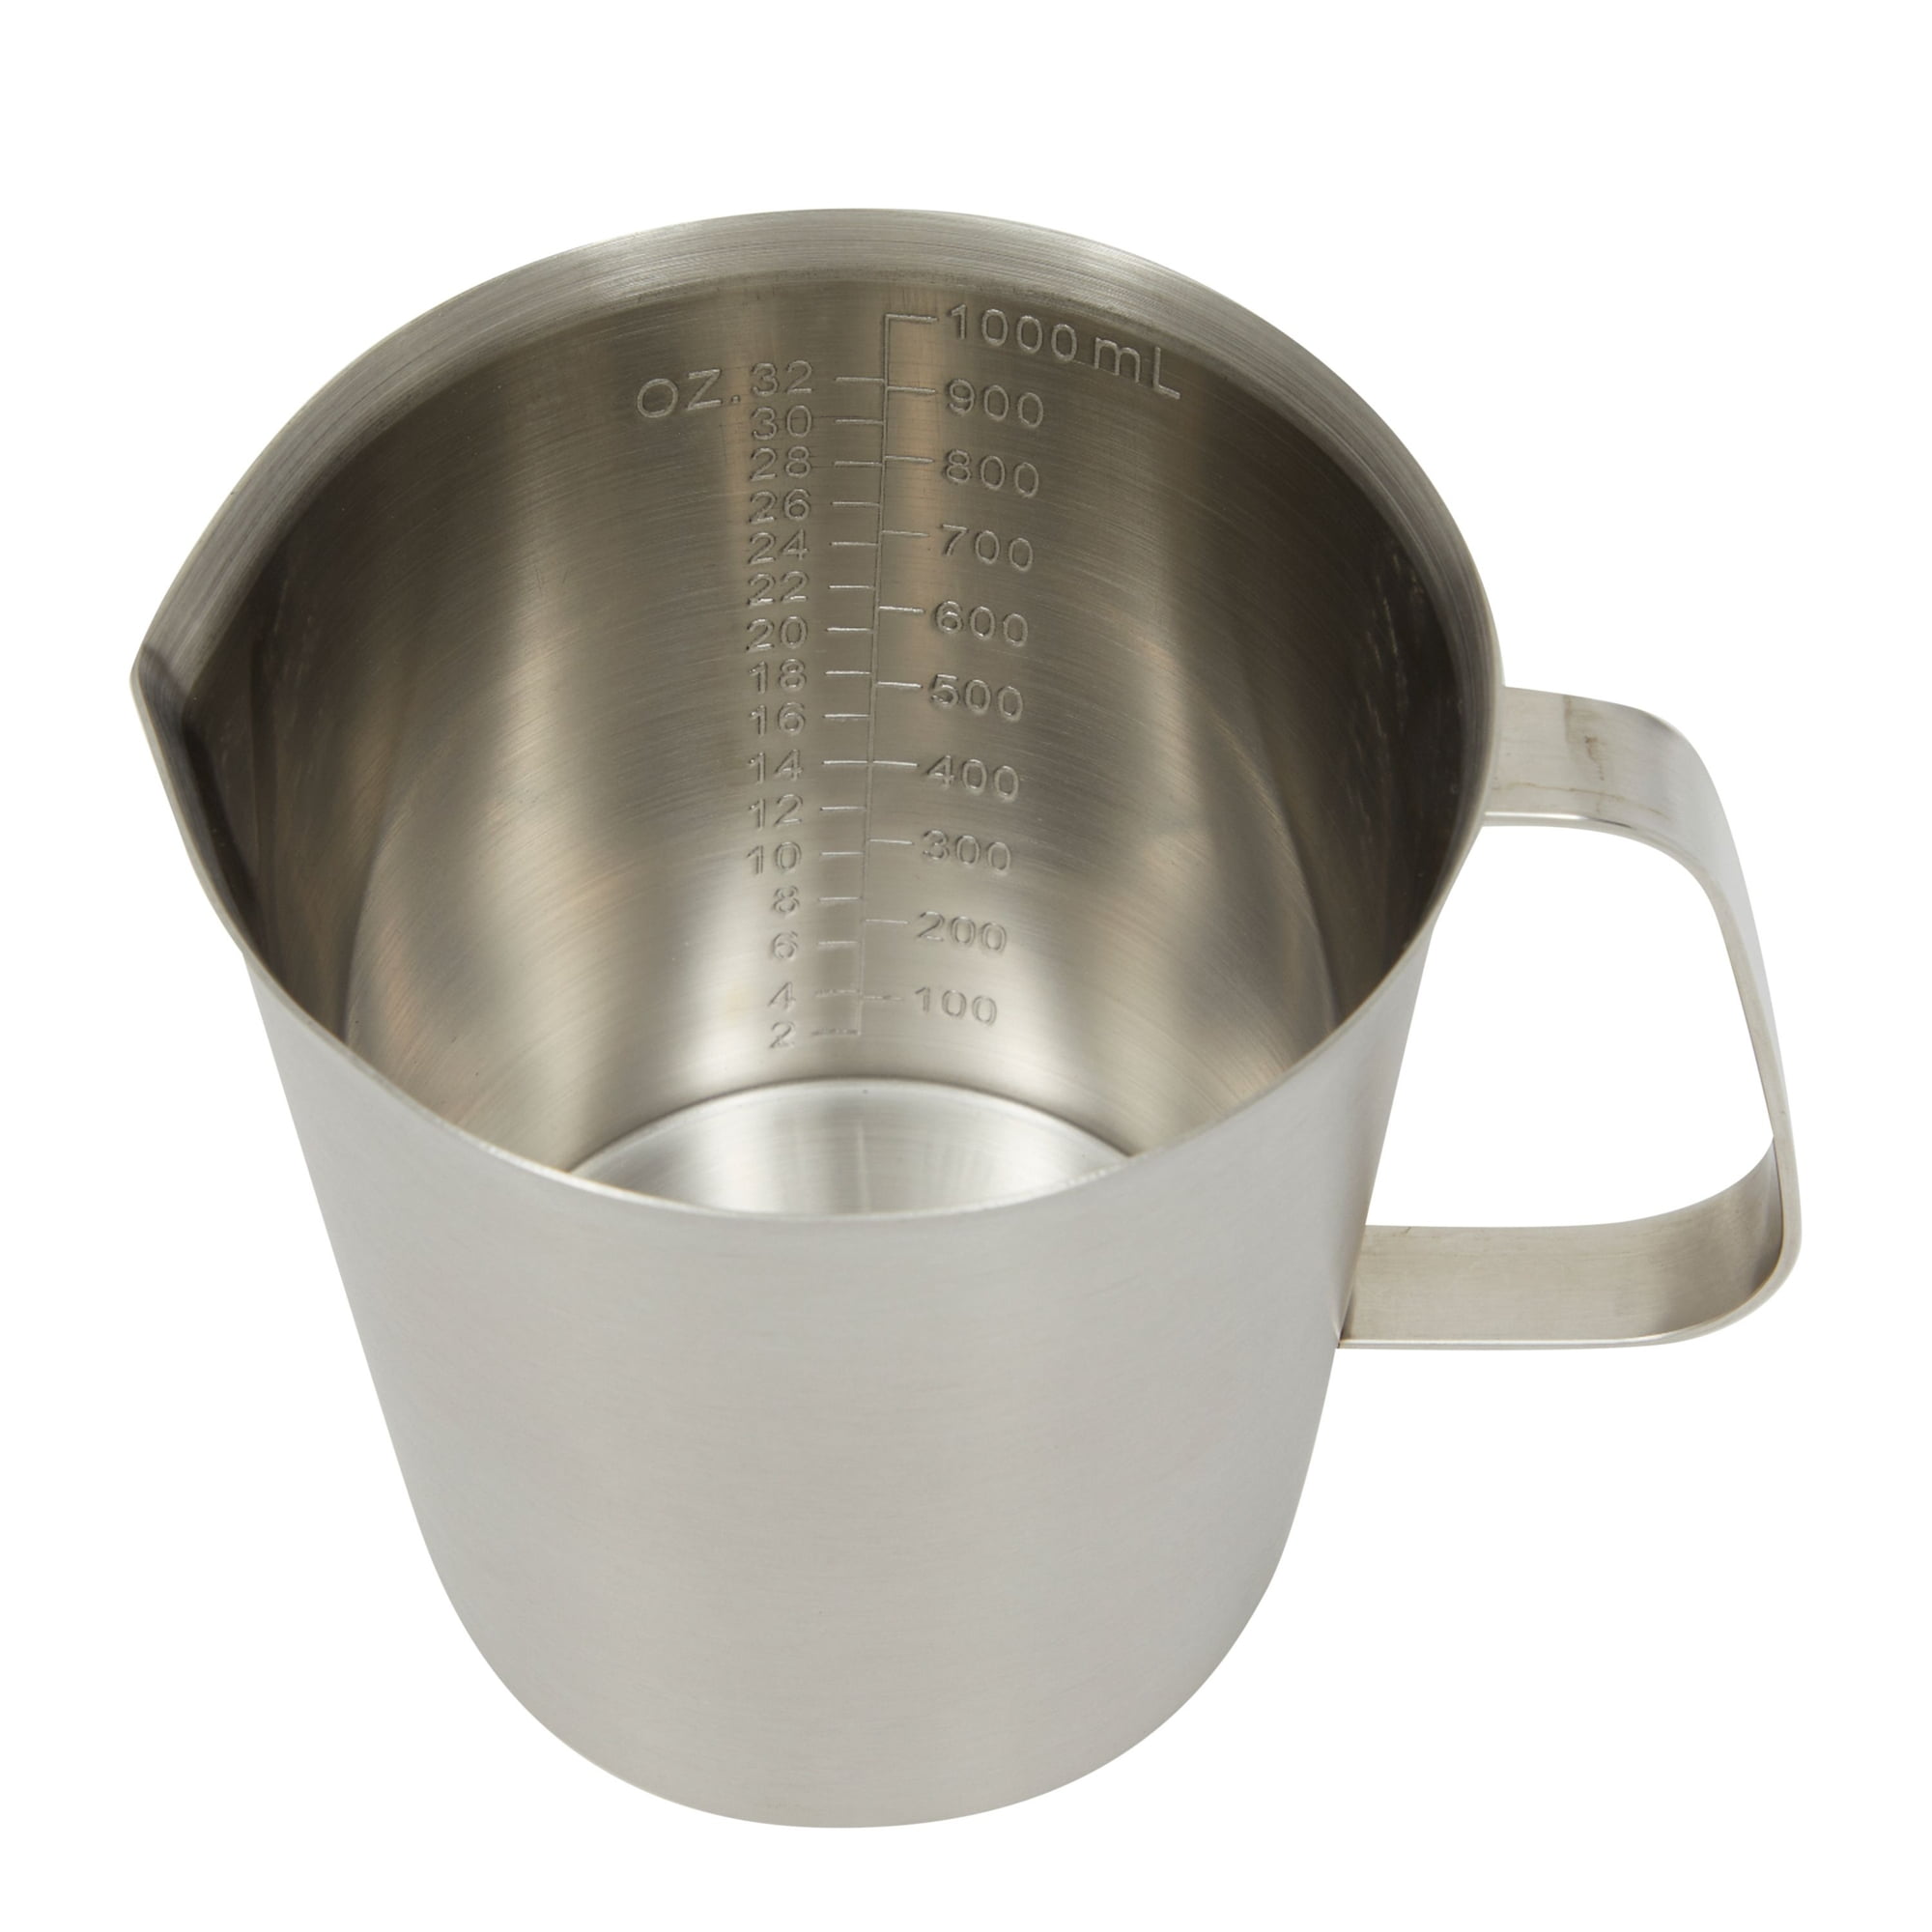 32 oz Stainless Steel Measuring Cup with Handle, 4 Cup Metal Pitcher with  Ounces and Milliliters Marking (1000 ml)